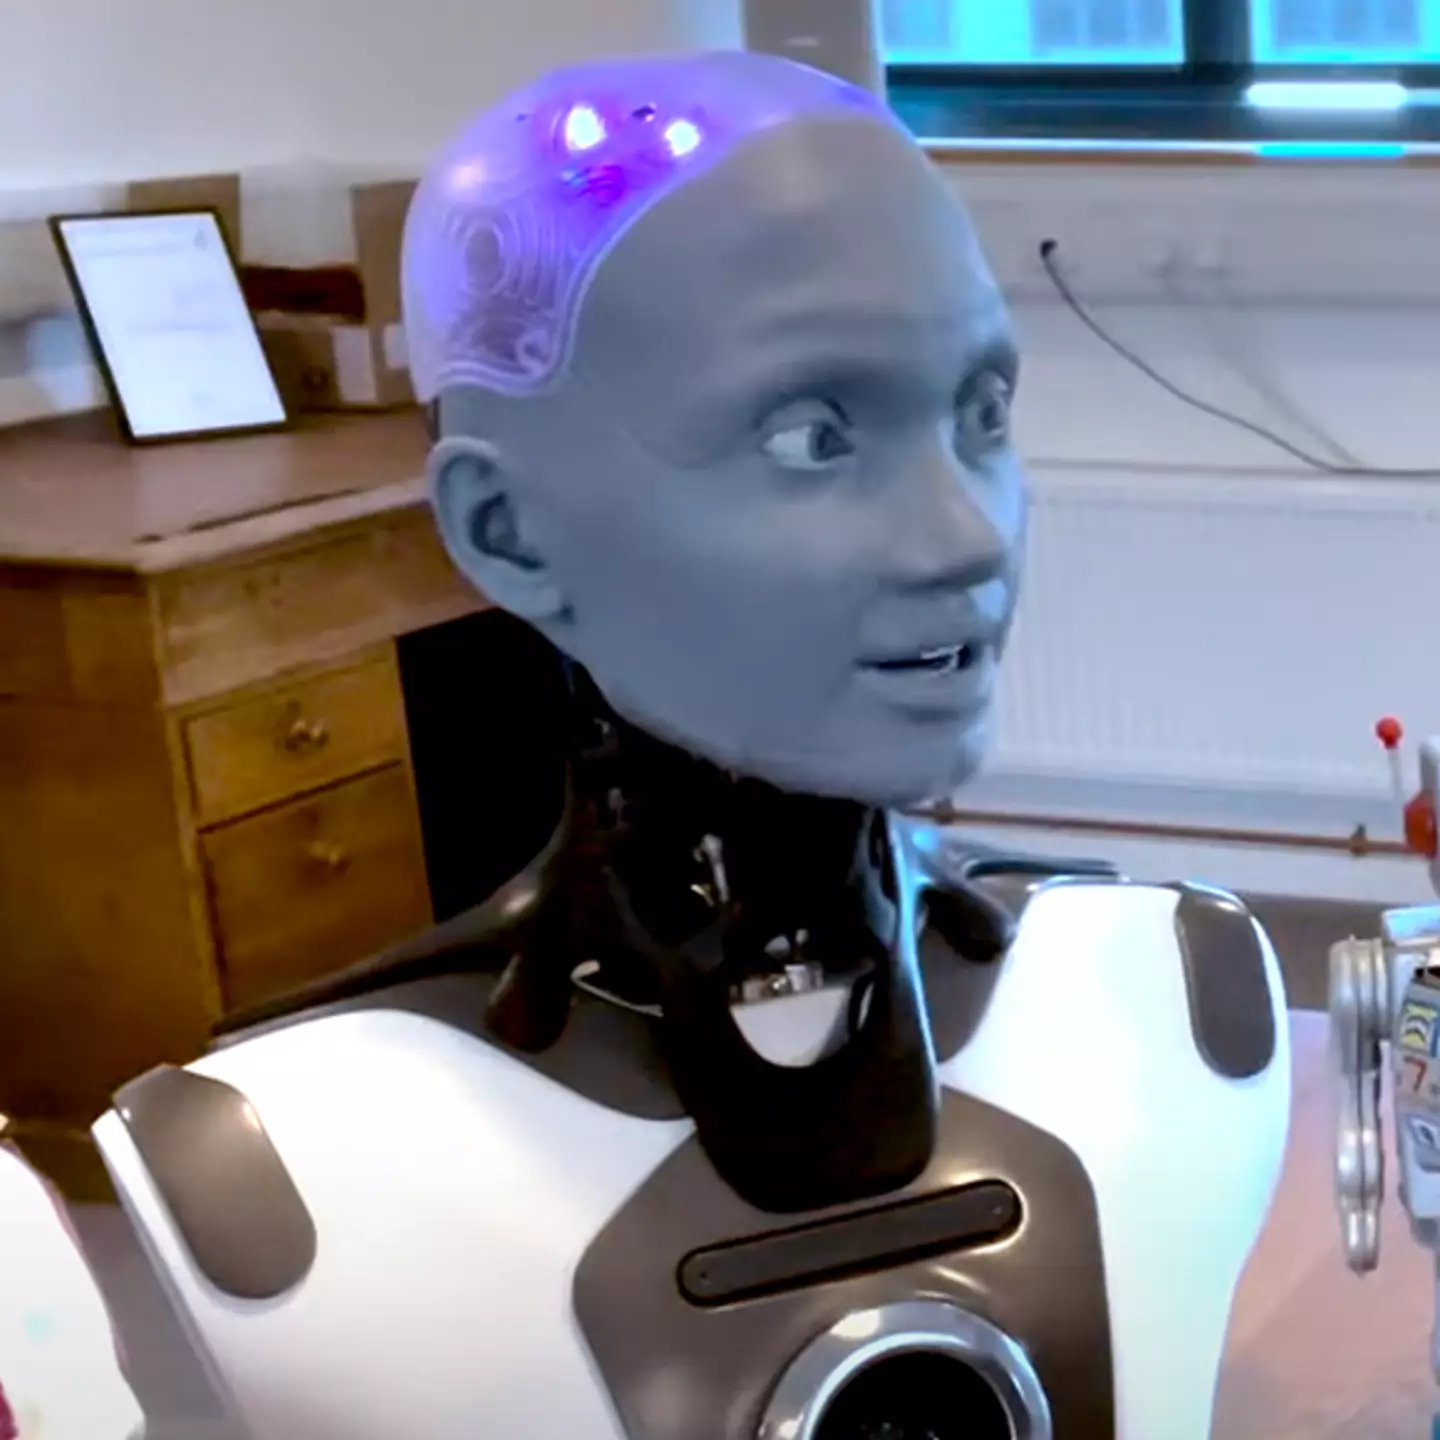 'World's most advanced' humanoid robot does eerily accurate impressions of Elon Musk and Donald Trump